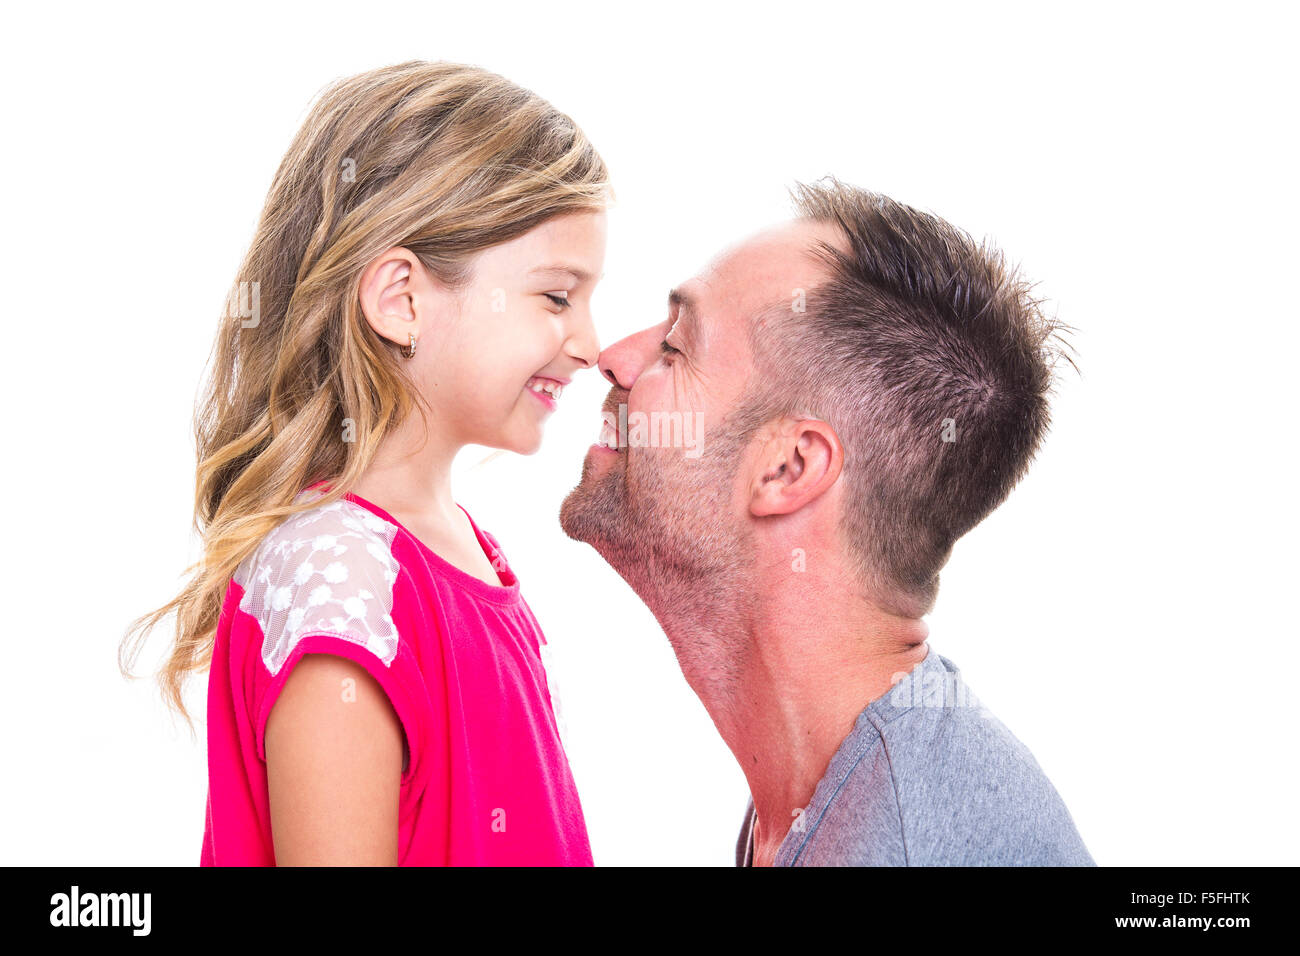 Papa petite fille, isolated on white Banque D'Images